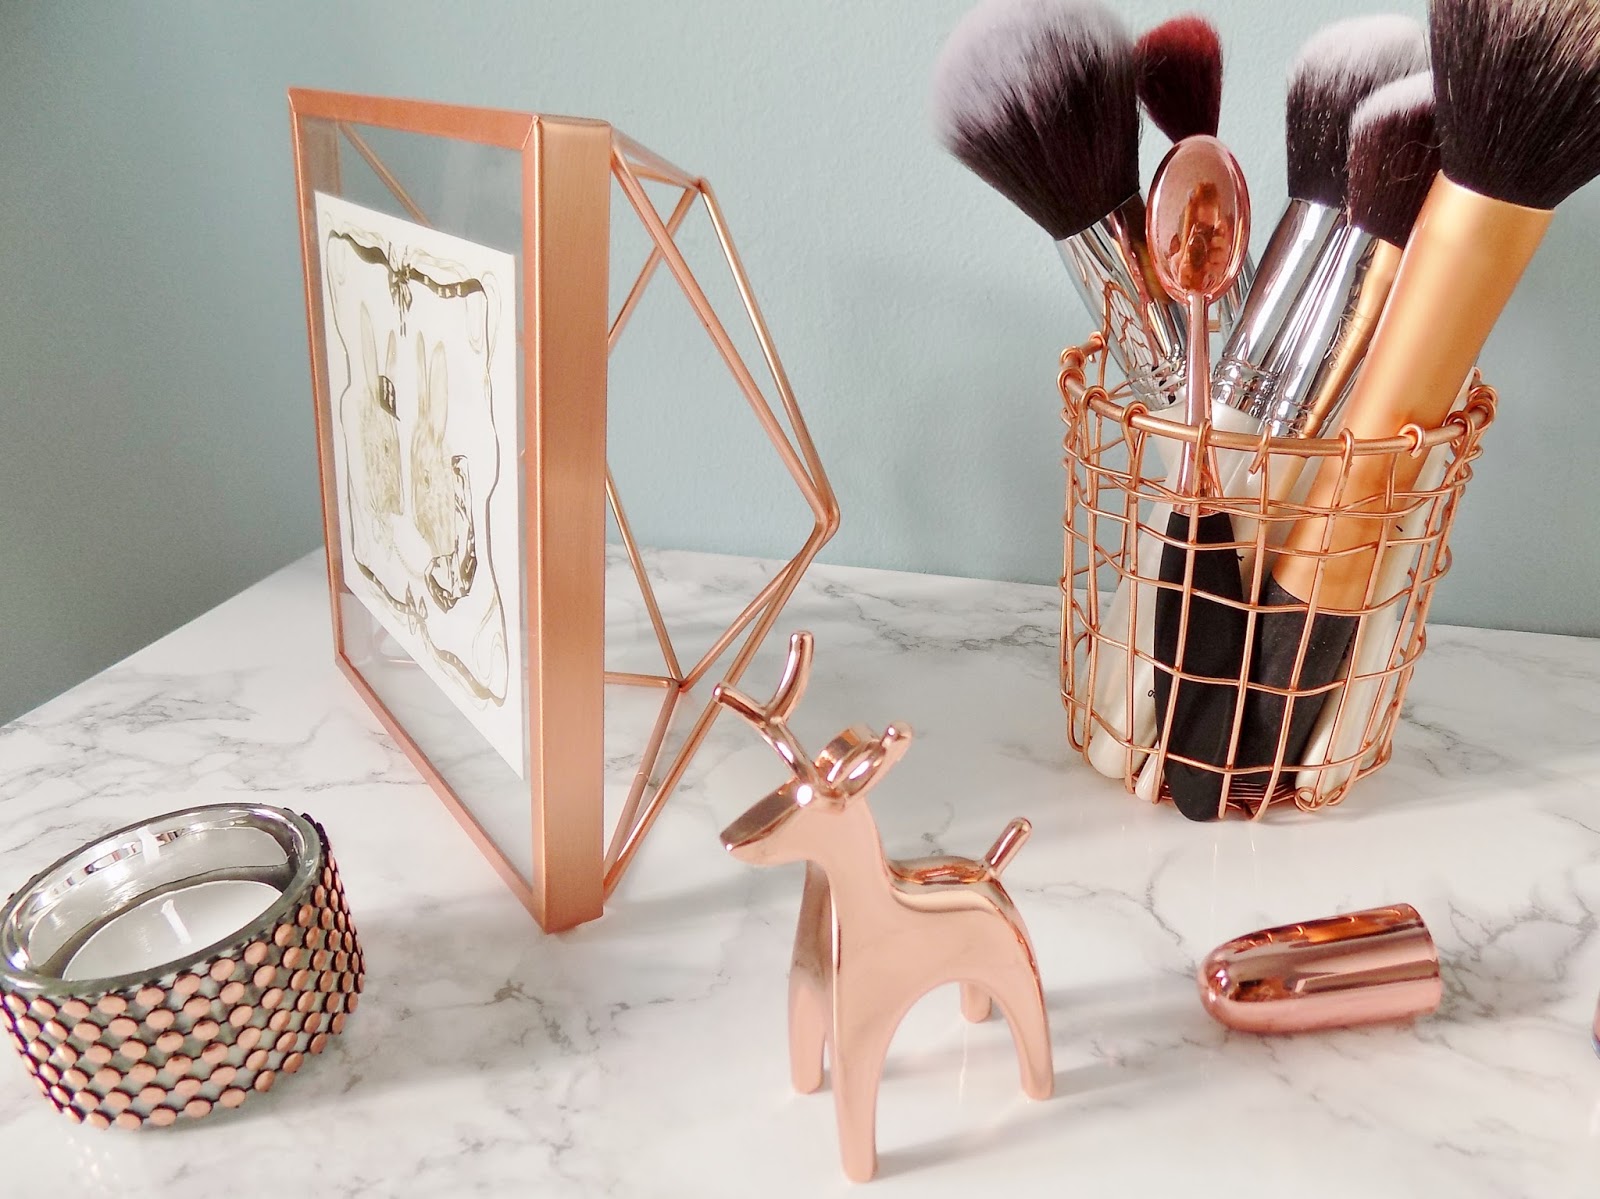 Copper Home Accessories that Will Look Amazing Next to Ultra Violet!_1